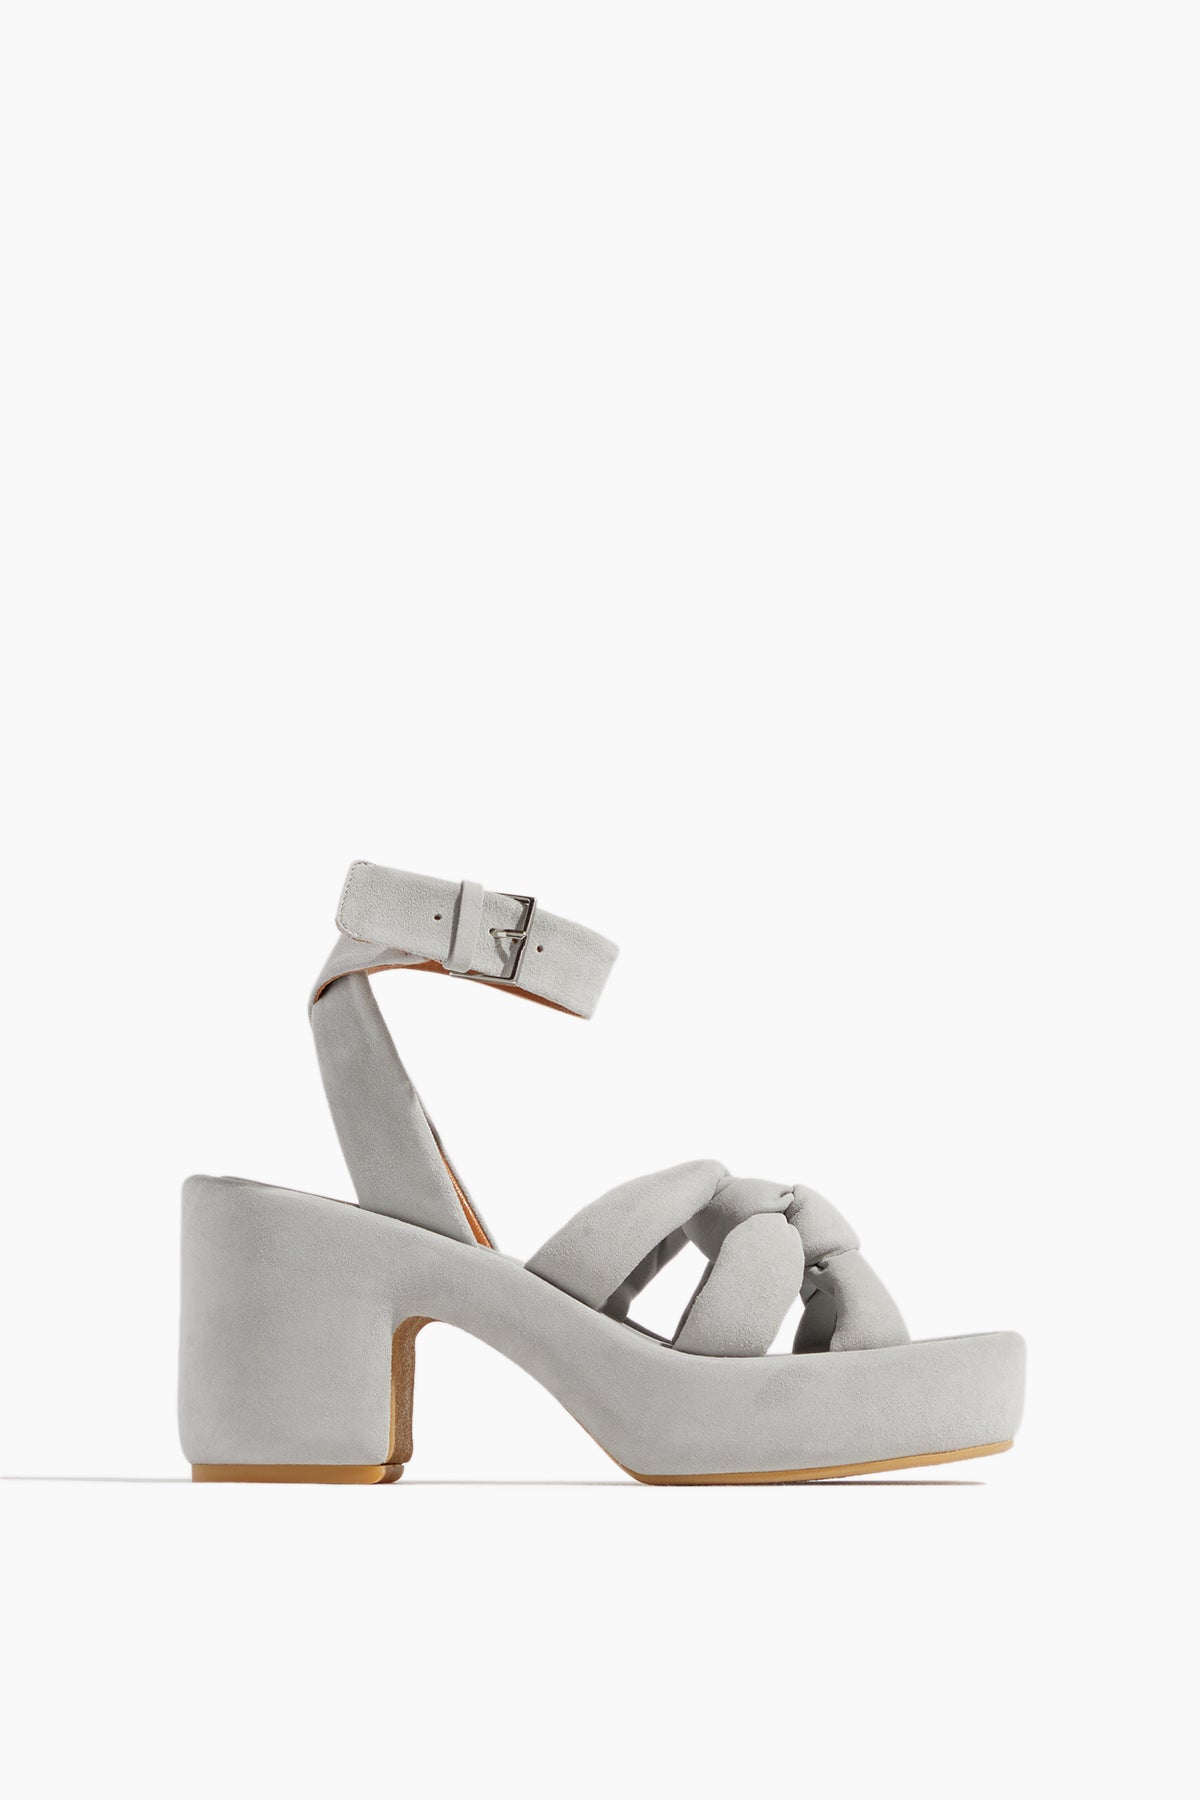 Clergerie Dayna Sandals in Grey - Grey - Size: 38.5 / 8 US